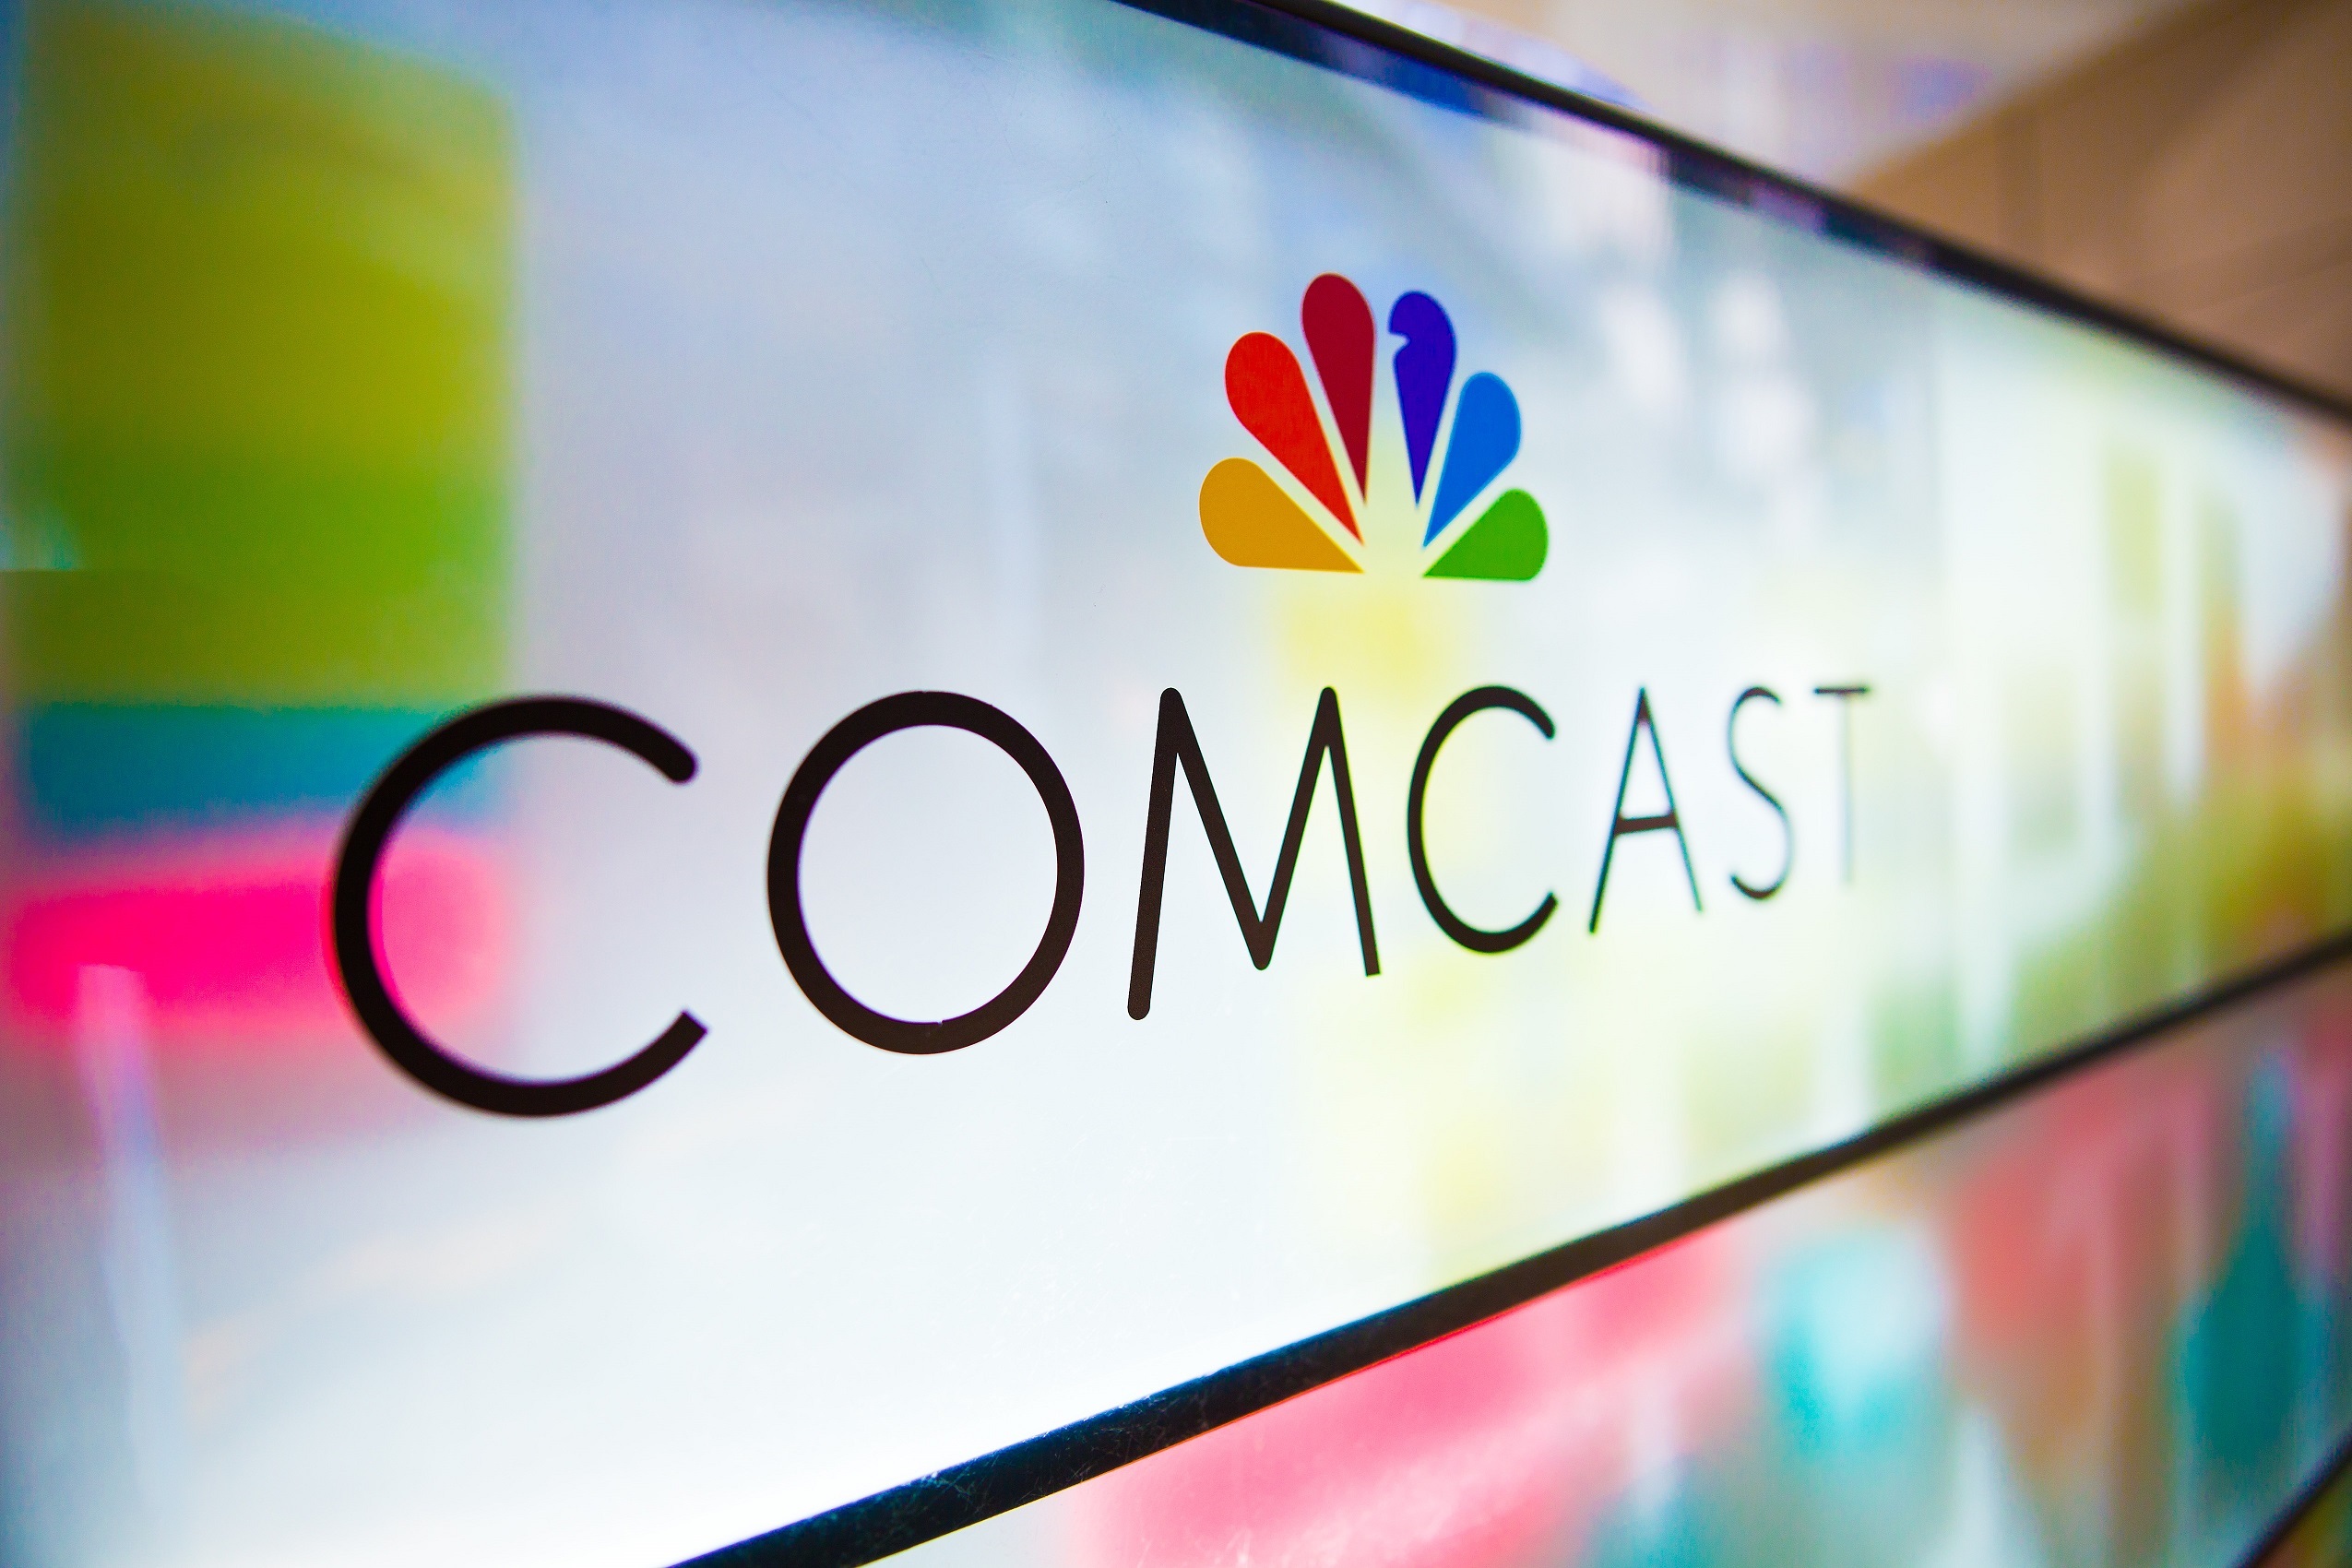 Comcast’s Continued Focus on Reliability Brings New Redundant Line to Gallup